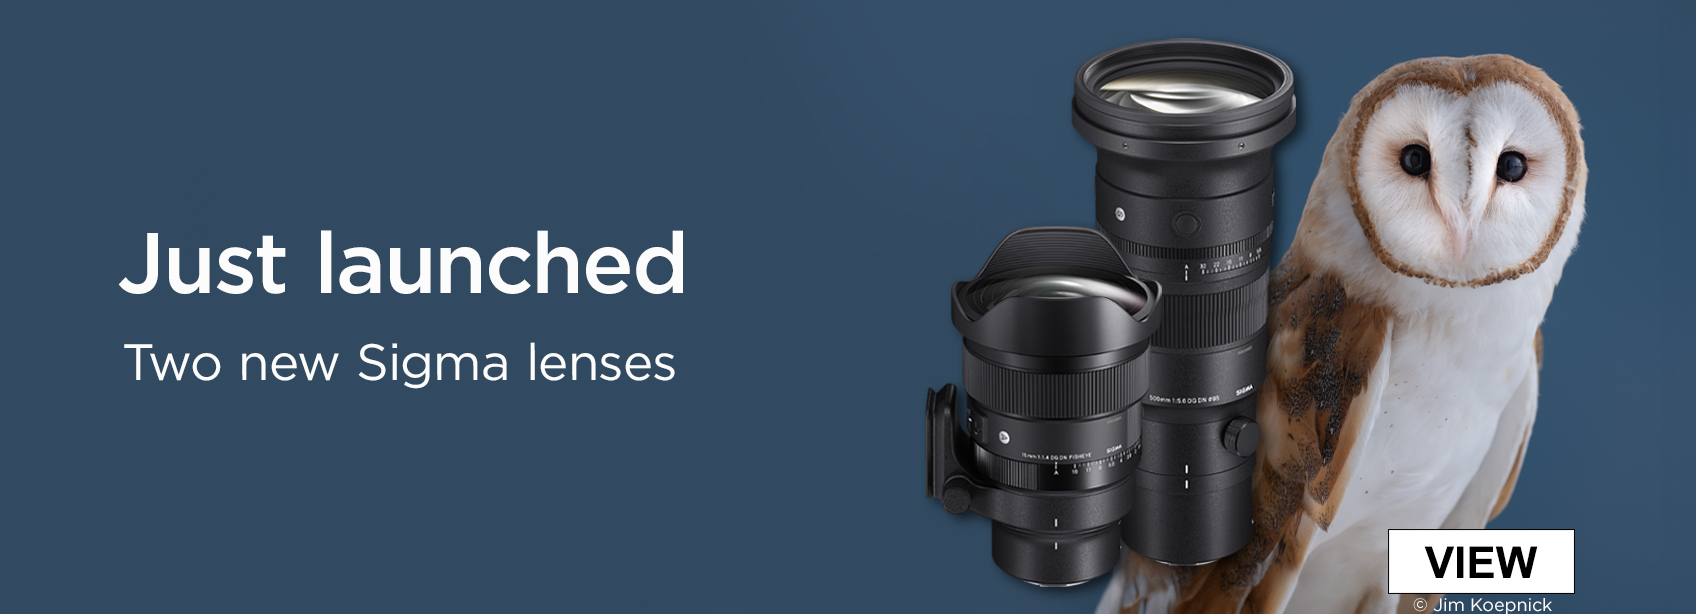 Just launched, two new Sigma lenses